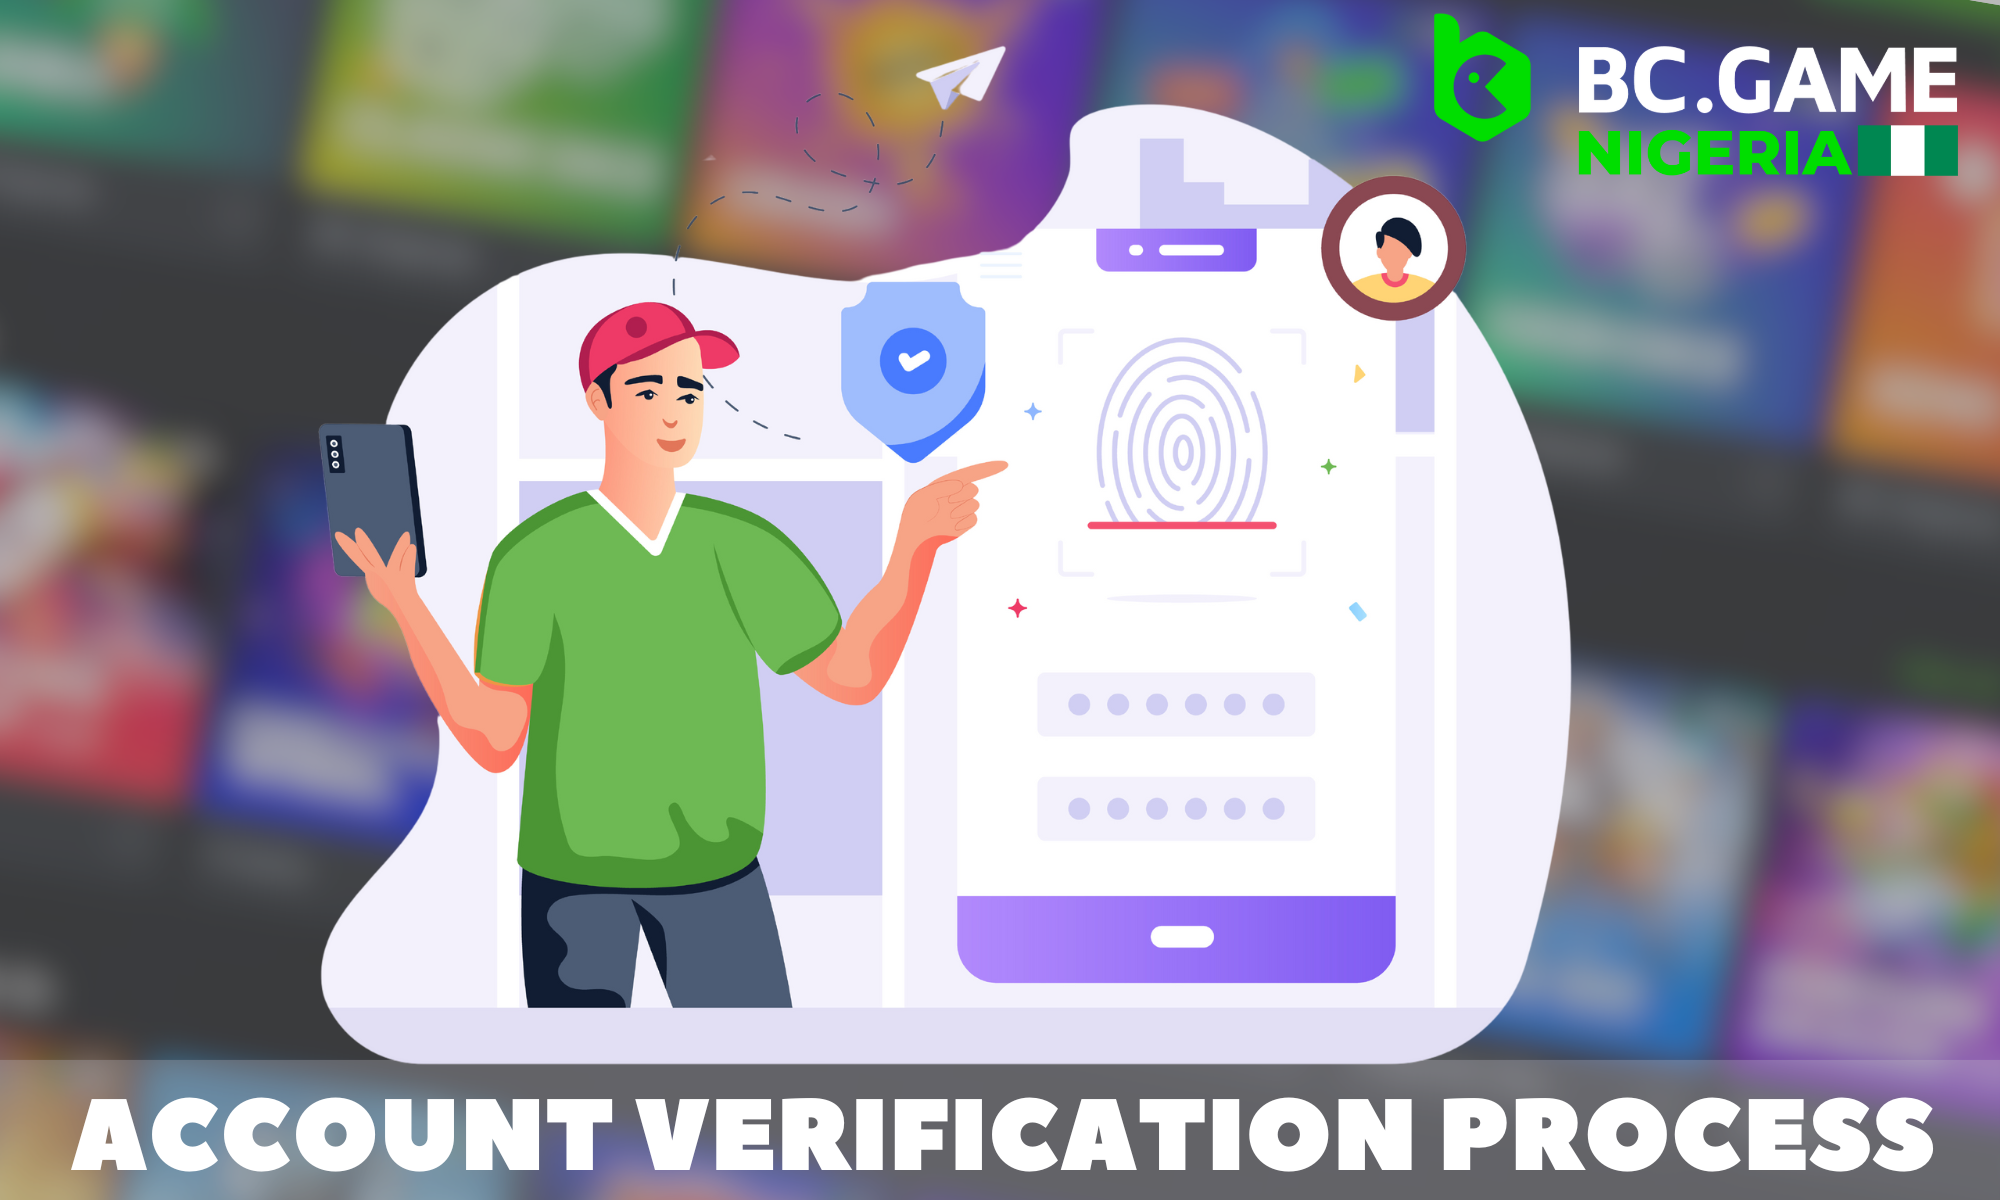 In BC Game, all users must pass account verification